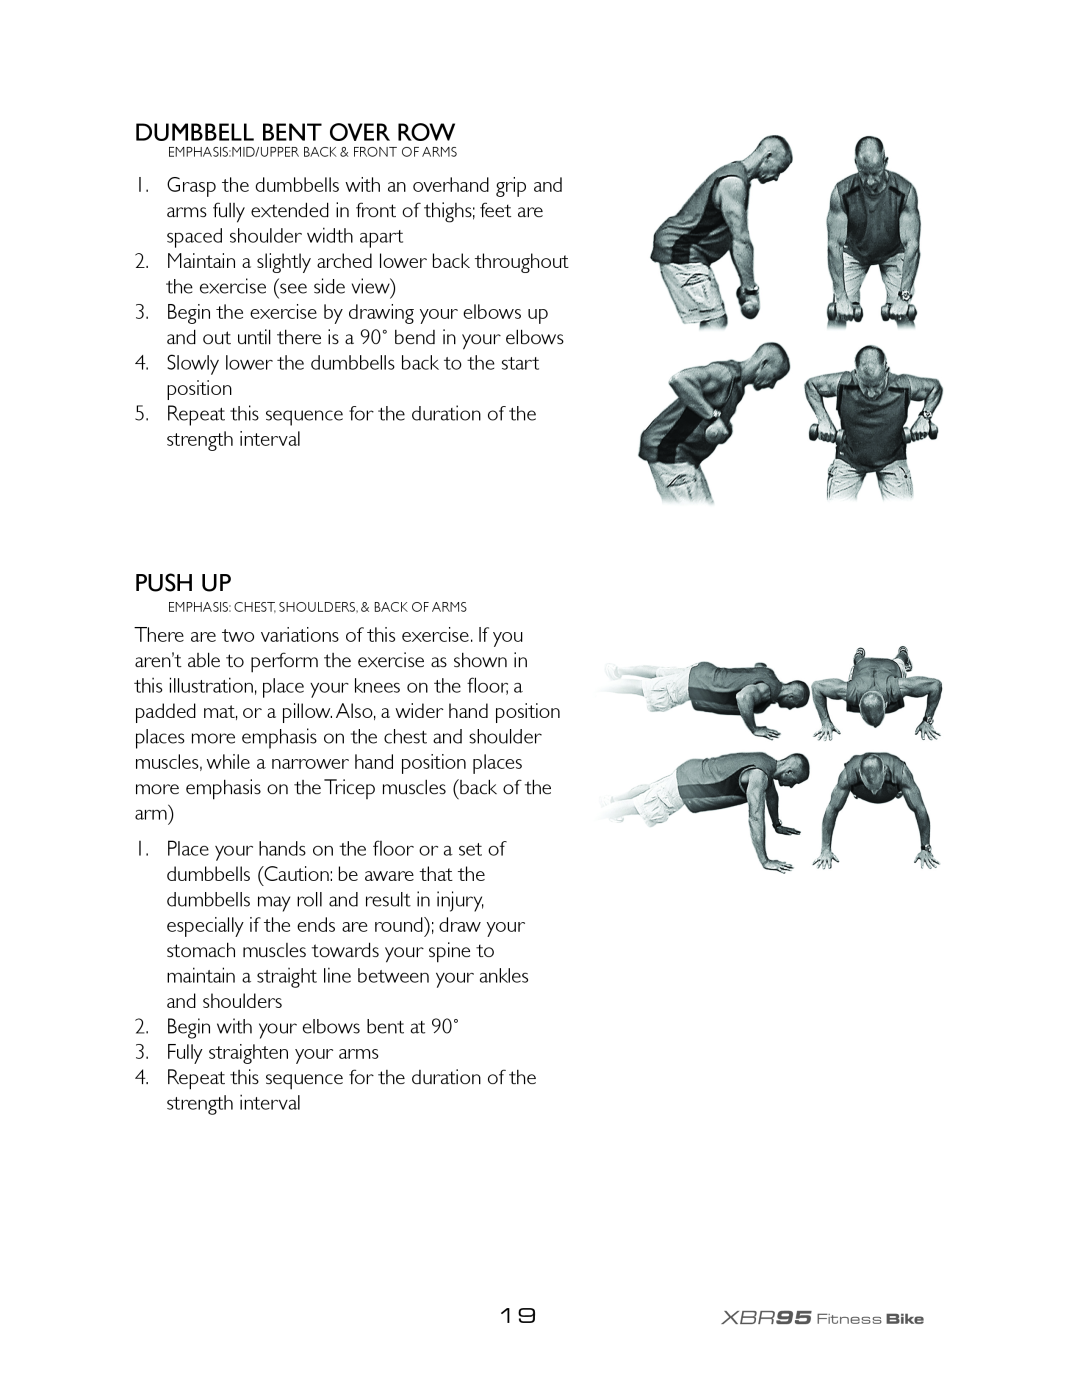 Spirit XBR95 owner manual Dumbbell Bent Over Row, Push Up 